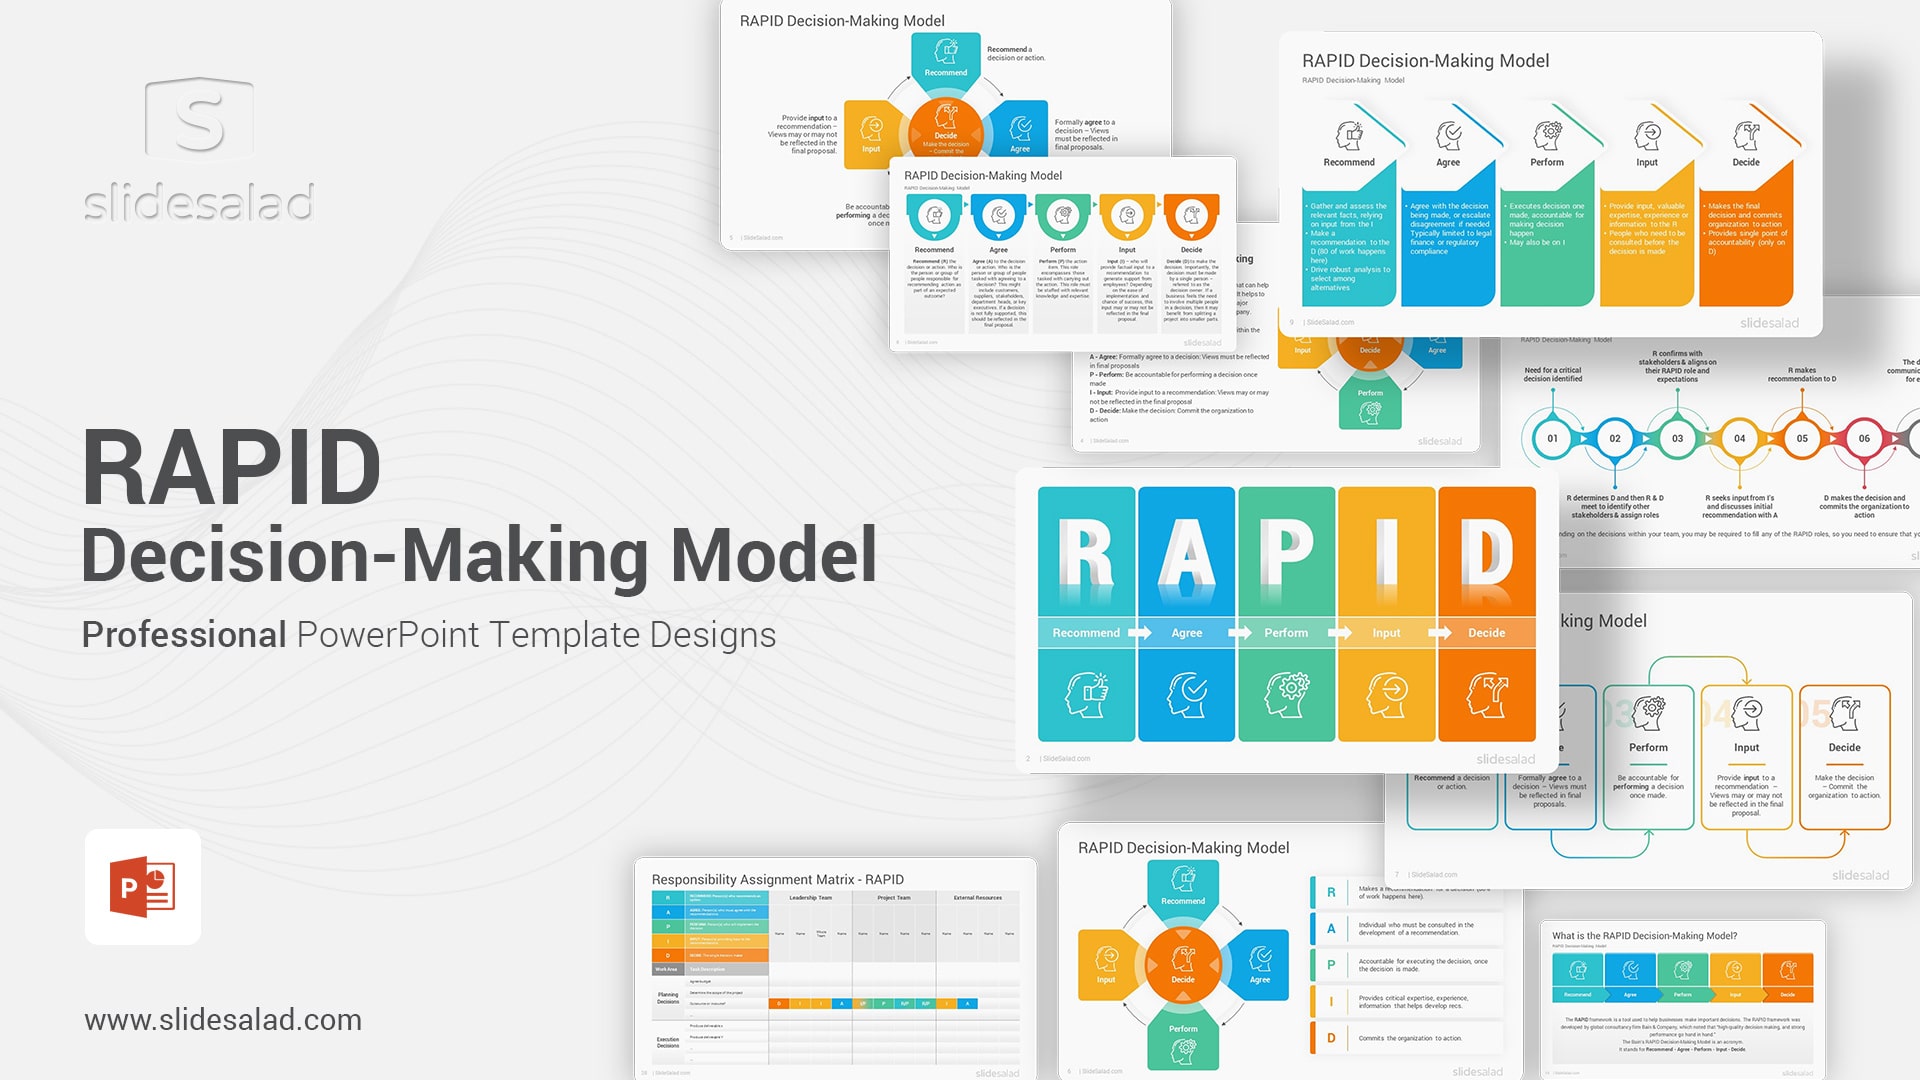 RAPID Decision Making Model PowerPoint Template - Best Way to Give Organizations a Clearer Way to Make Decisions